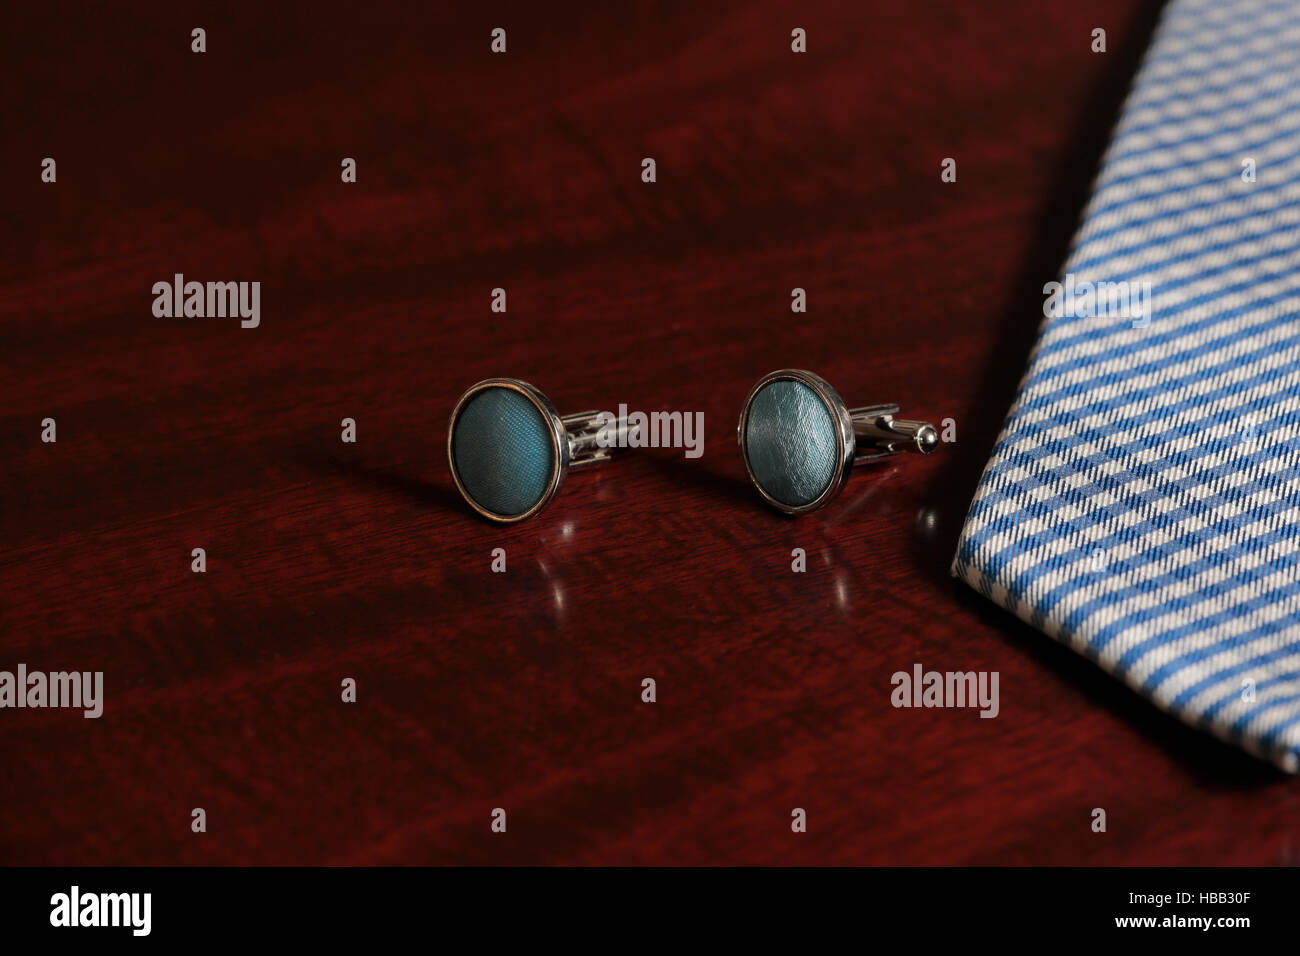 Cuff links and tie on mahogany wooden background Stock Photo